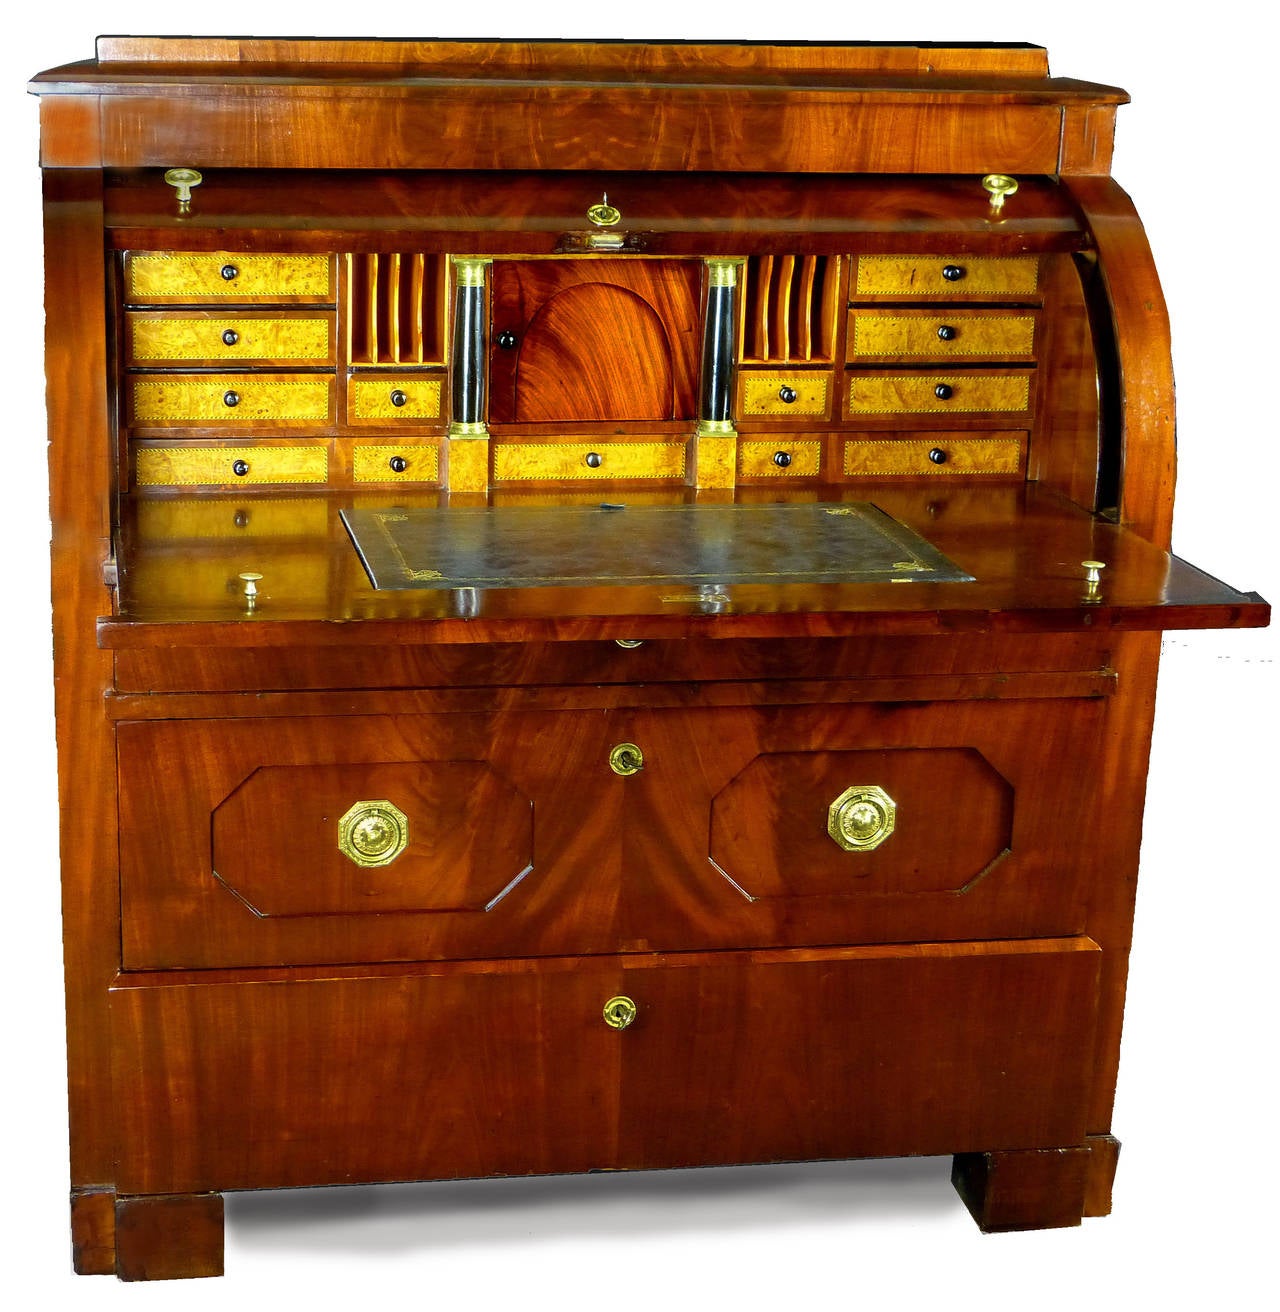 Imposing Biedermeier bureau of flame mahogany and of North German origin with cylinder top. The sliding writing surface has a central tooled leather panel that rises to act as a lectern. Various small drawers above with bird's eye maple fronts